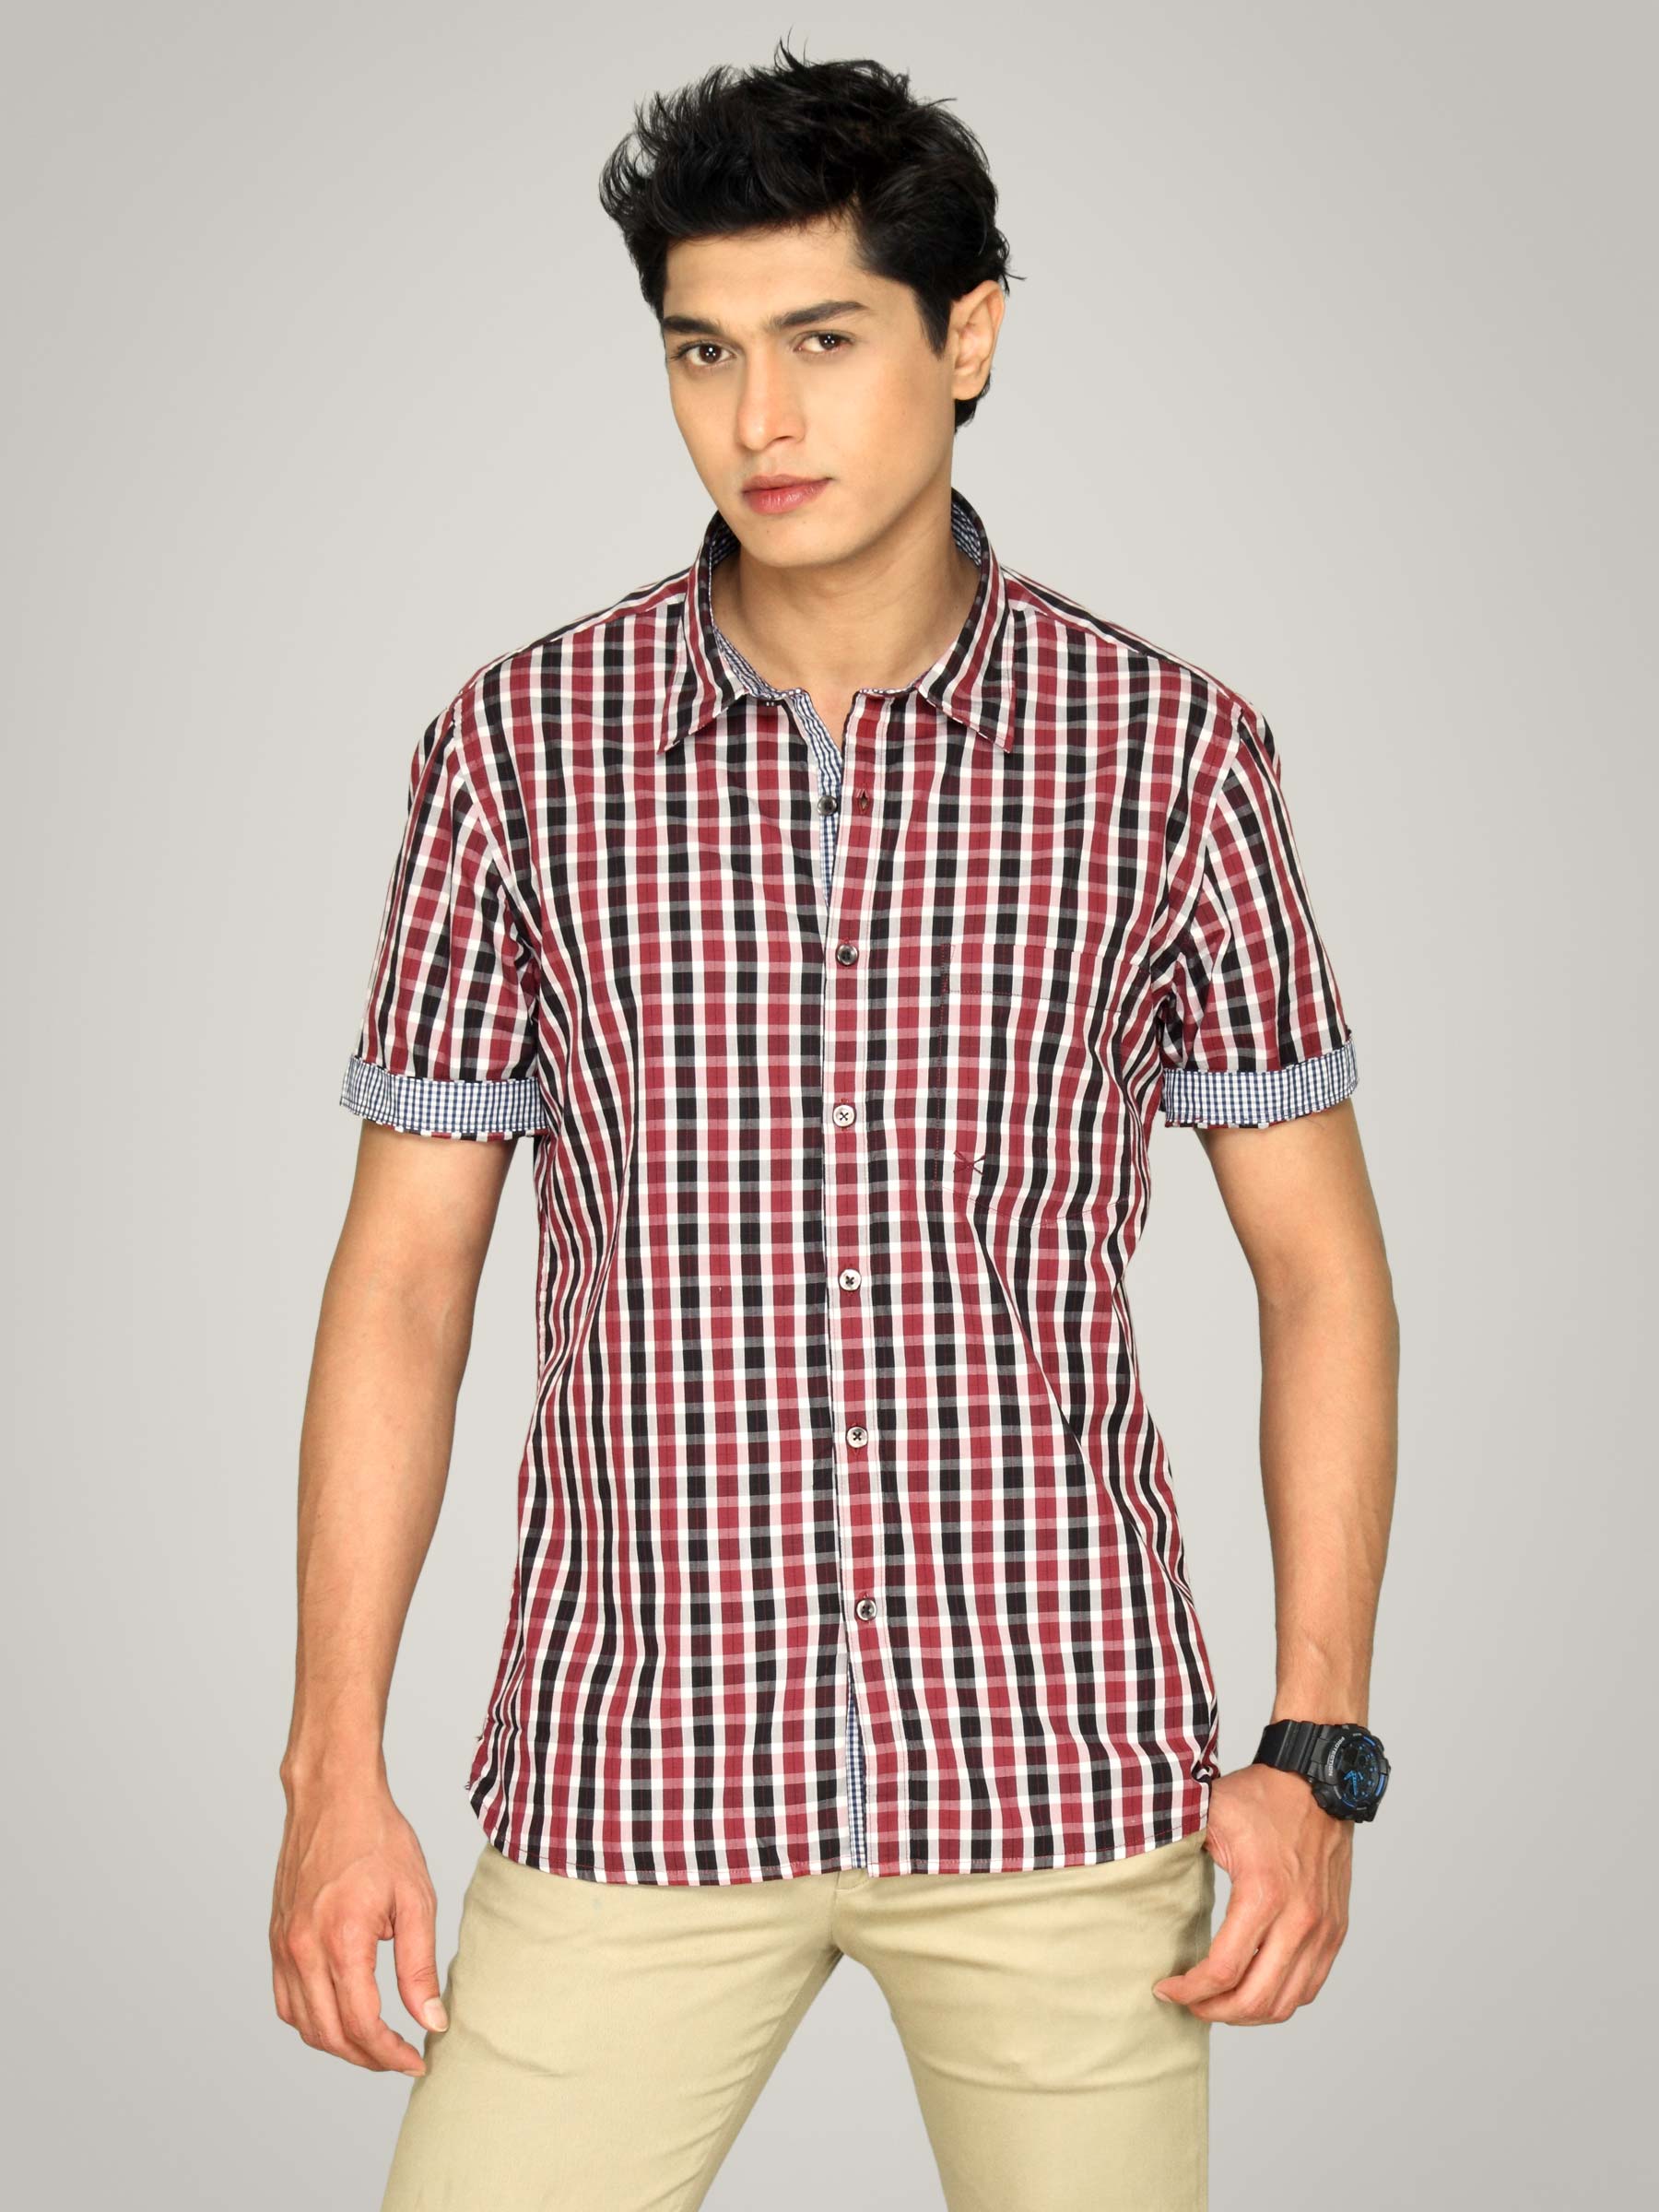 Scullers Men Scul White Gingham Red Shirt